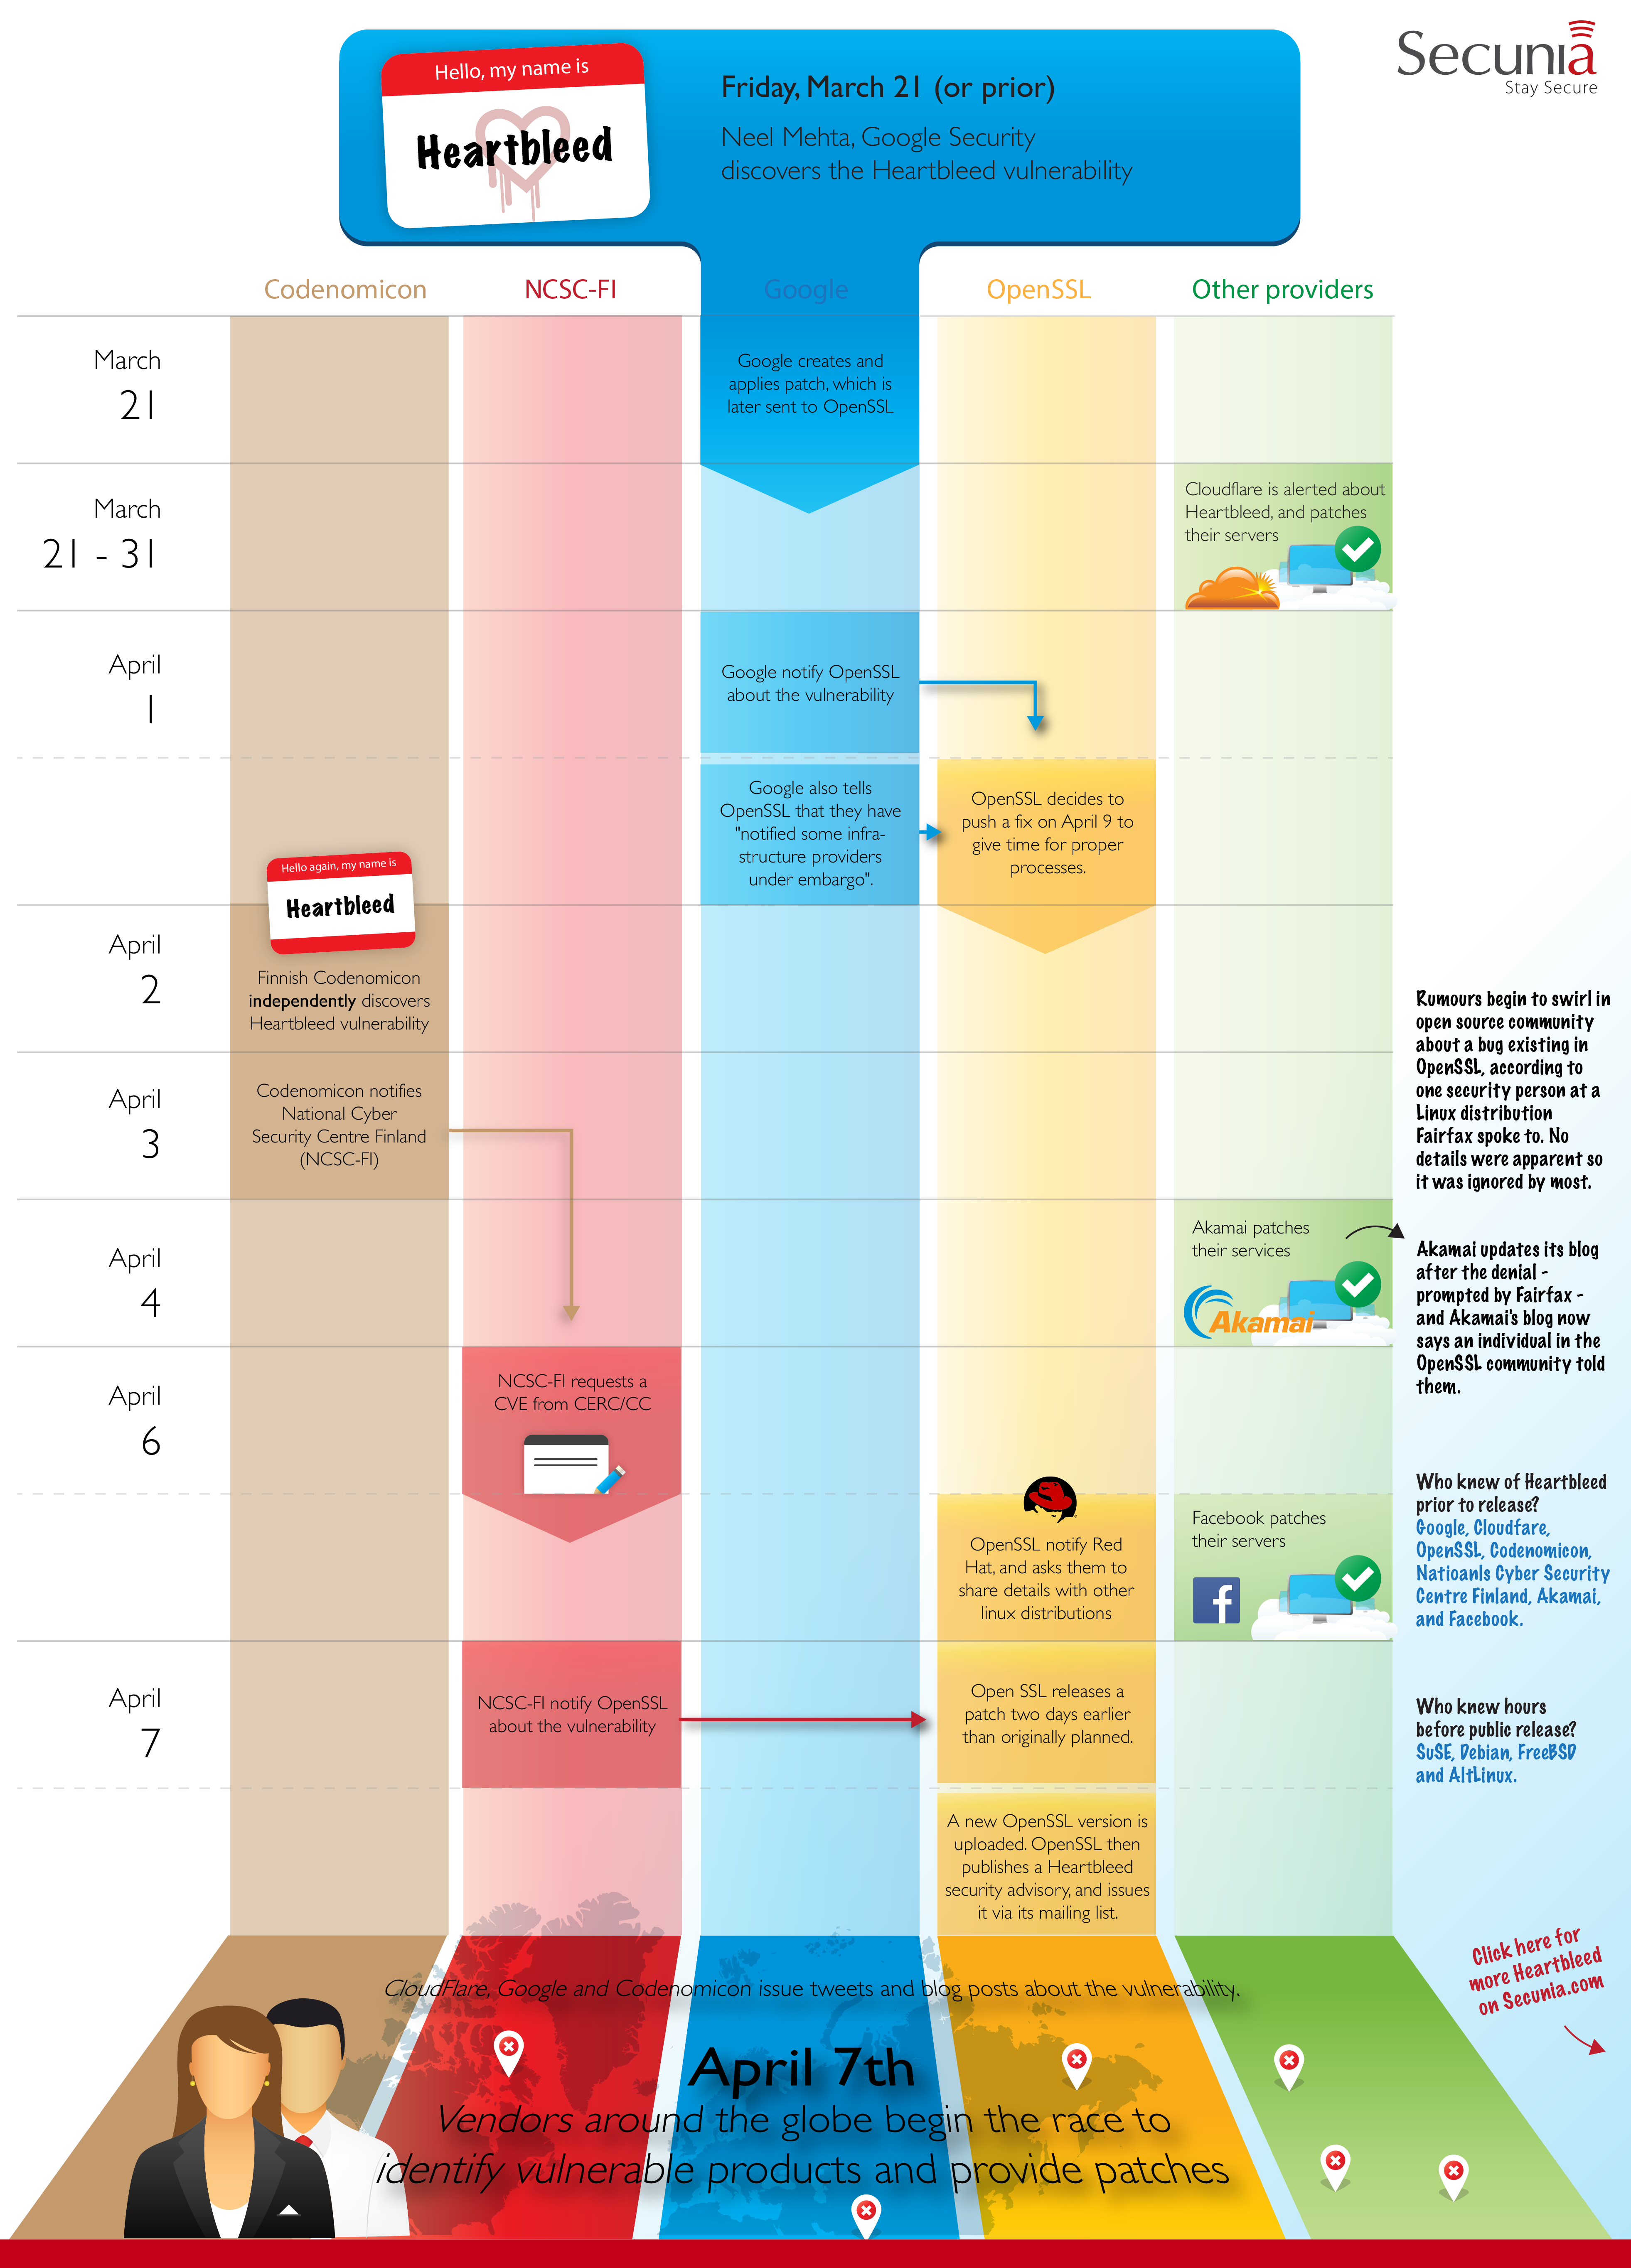 Secunia_Heartbleed_Disclosure Timeline_Infographic_June 2014FINAL